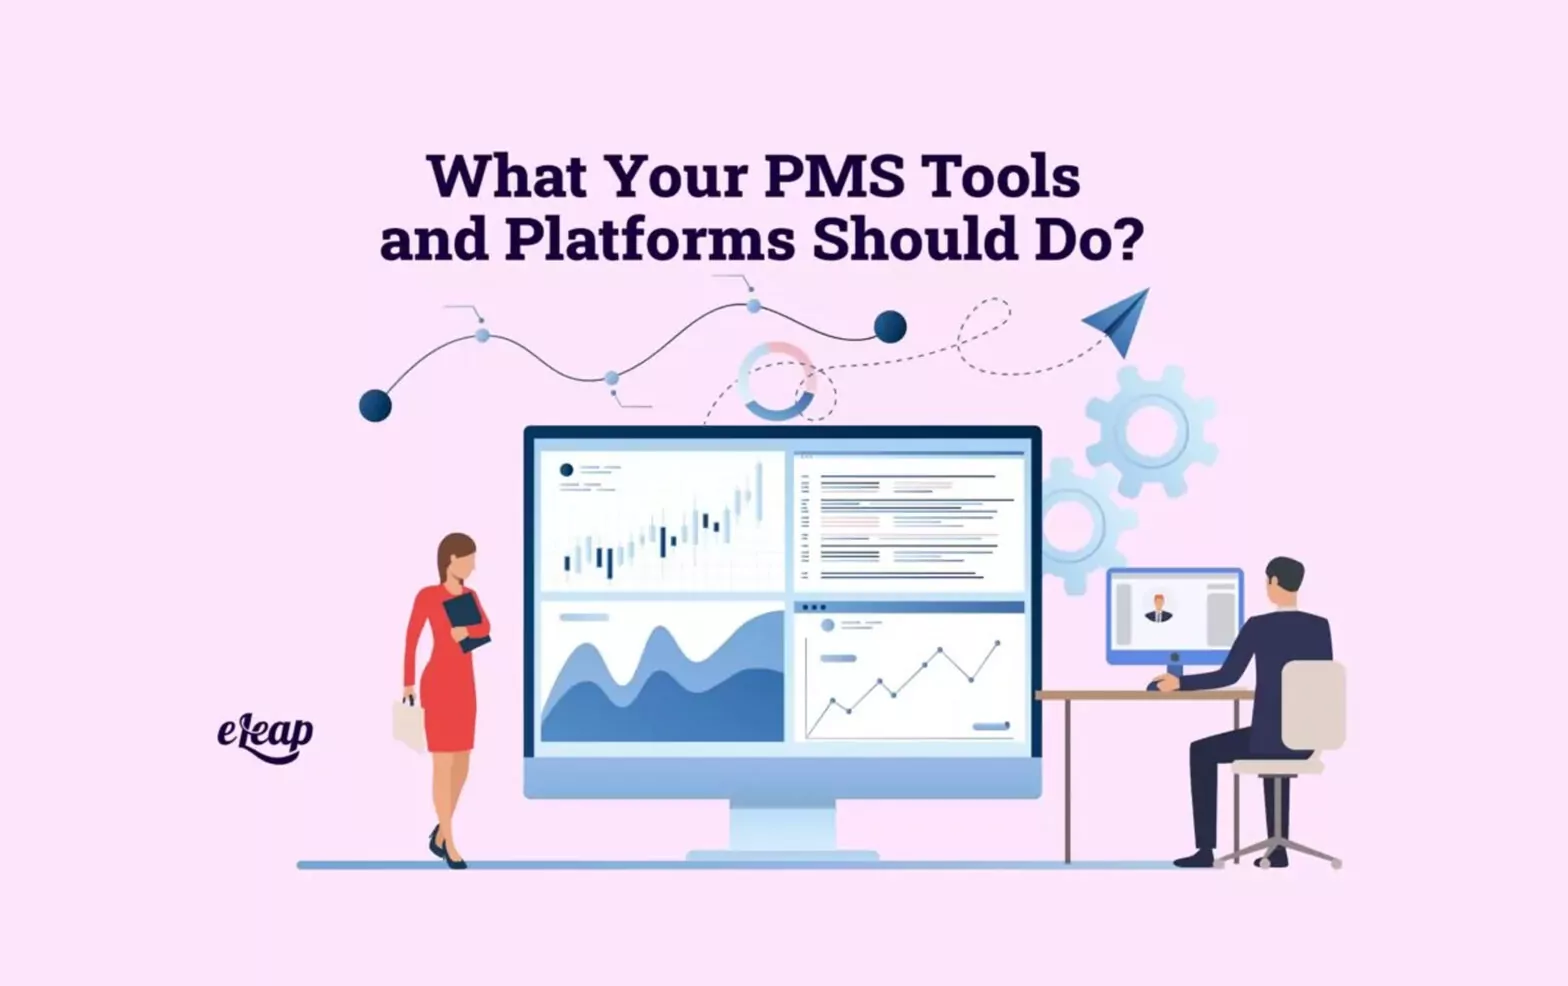 What Your PMS Tools and Platforms Should Do